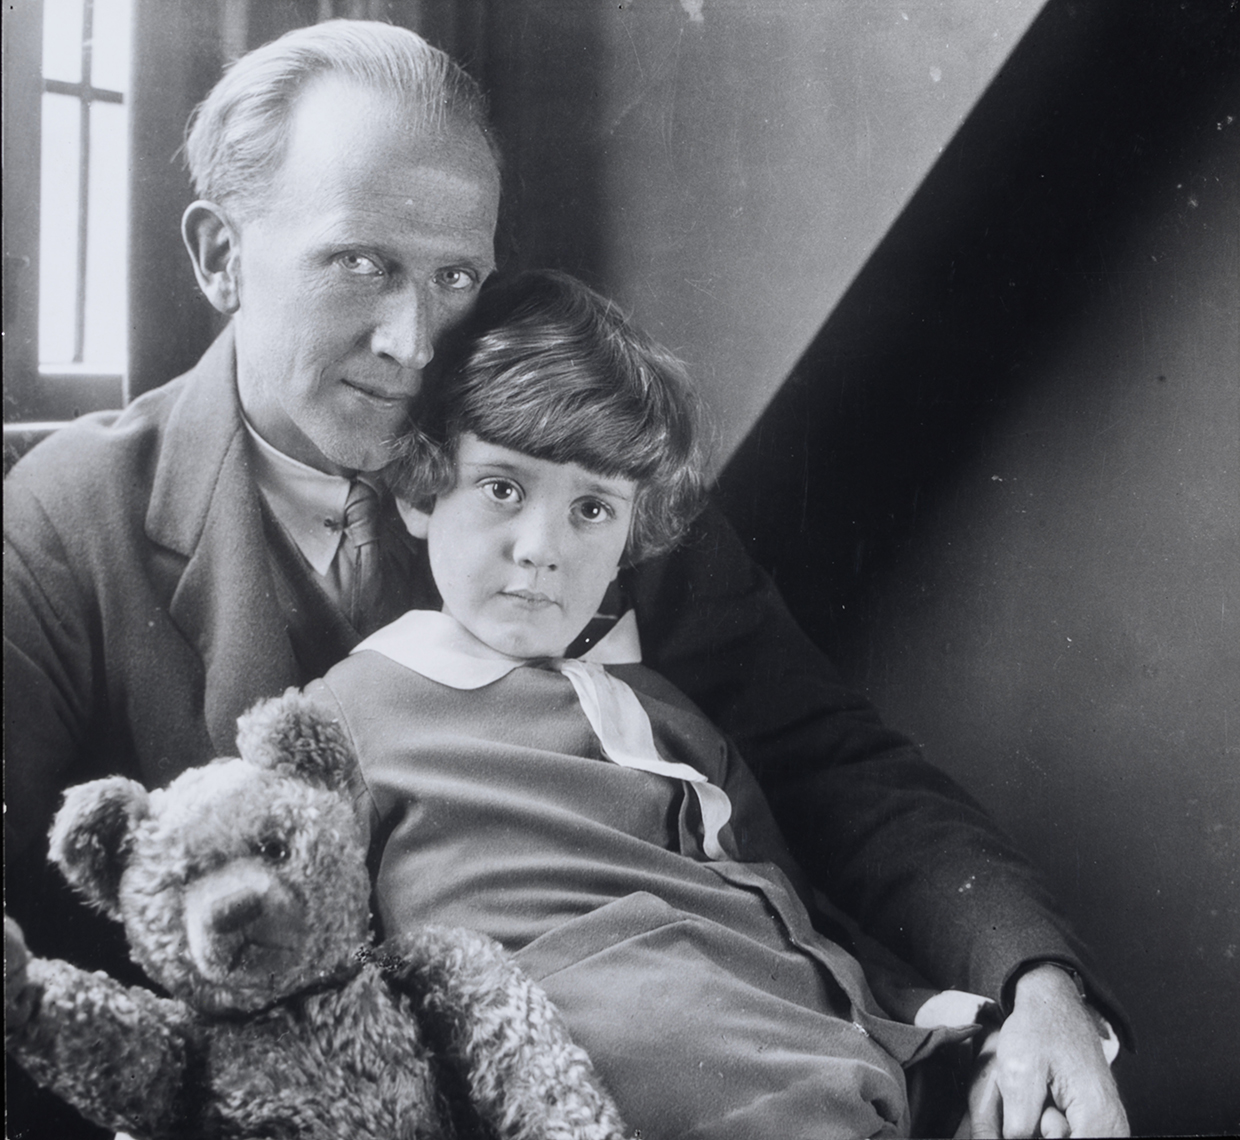 A.A. Milne, Christopher Robin Milne and Winnie-the-Pooh.